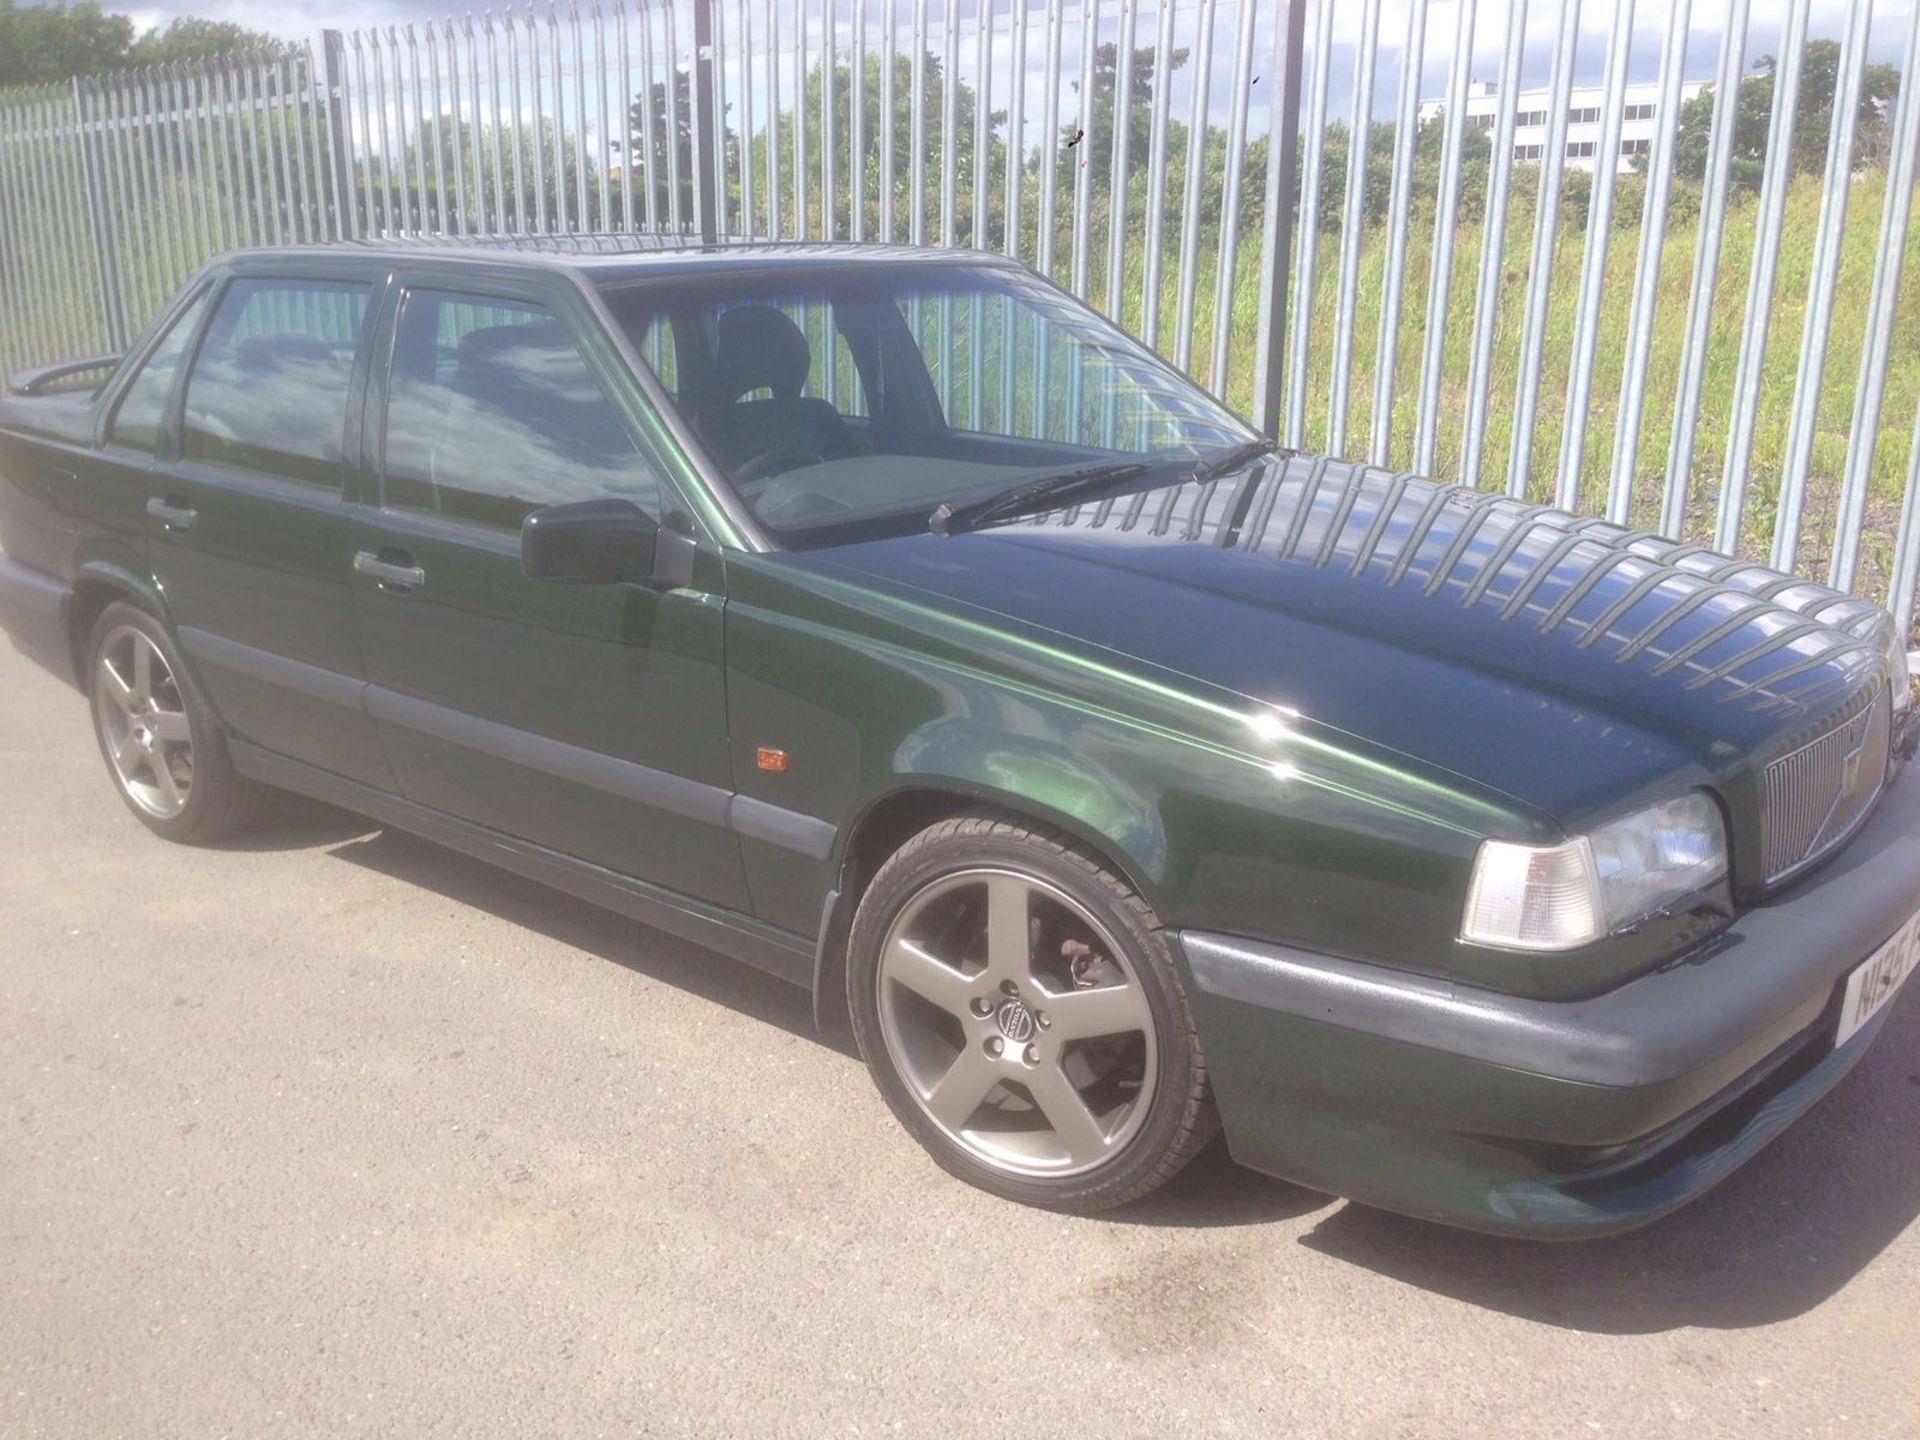 VOLVO T5-R saloon auto, 1995/N. olive green, - Image 4 of 16